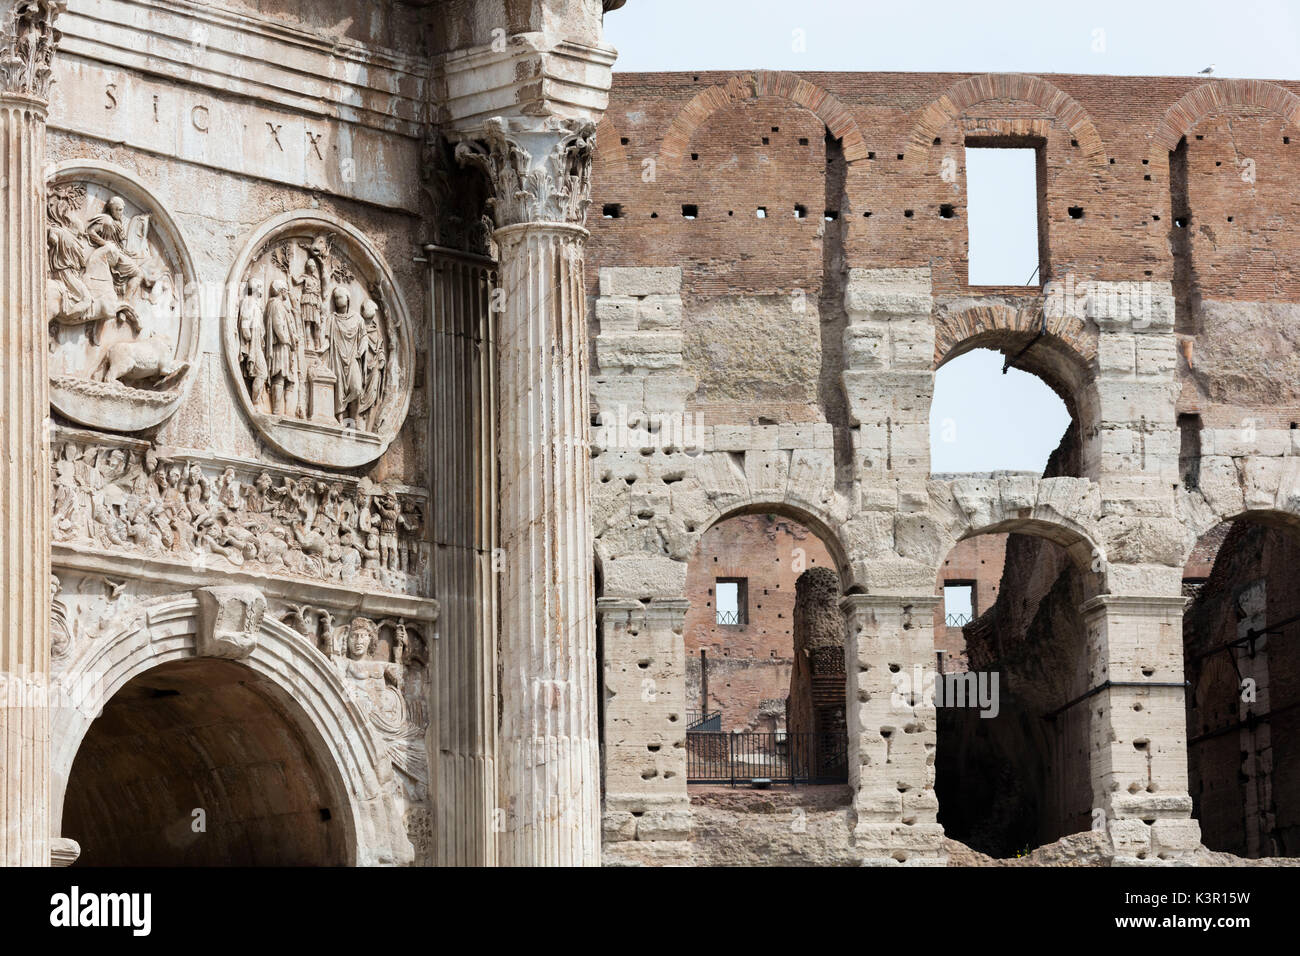 Architectural details of the Arch of Constantine and Colosseum the largest amphitheatre ever built Rome Lazio Italy Europe Stock Photo